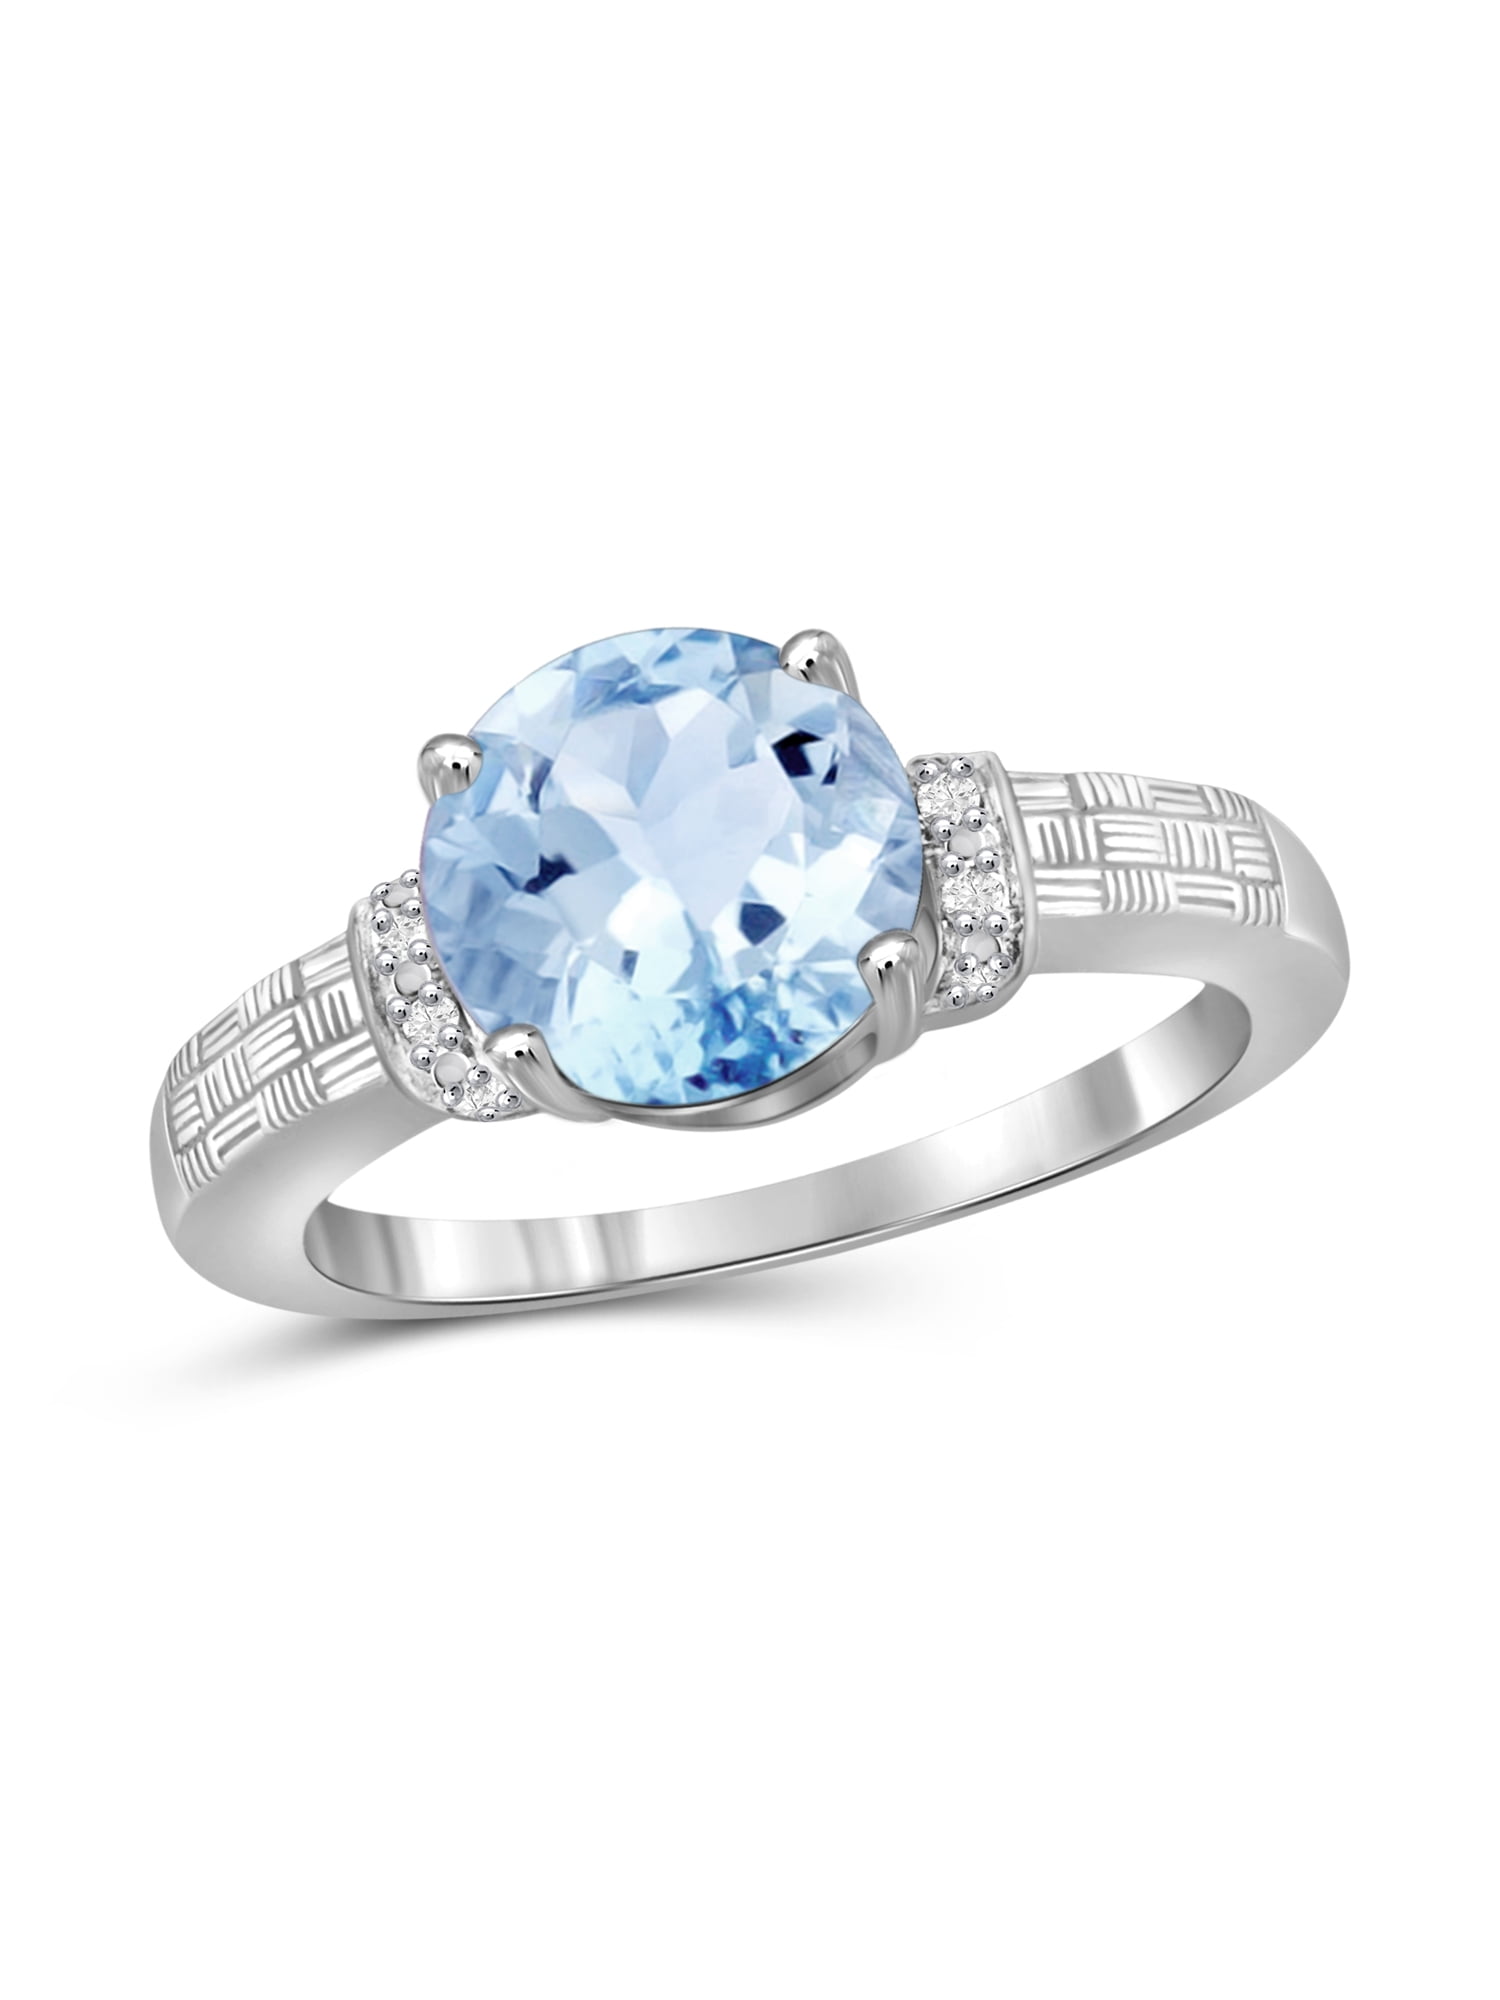 SHOP LC Oval Sky Blue Topaz Solitaire Ring for Women 925 Sterling Silver  Birthstone Jewelry Gifts for Women Size 5 Ct 1.9 Birthday Gifts for Women |  Amazon.com